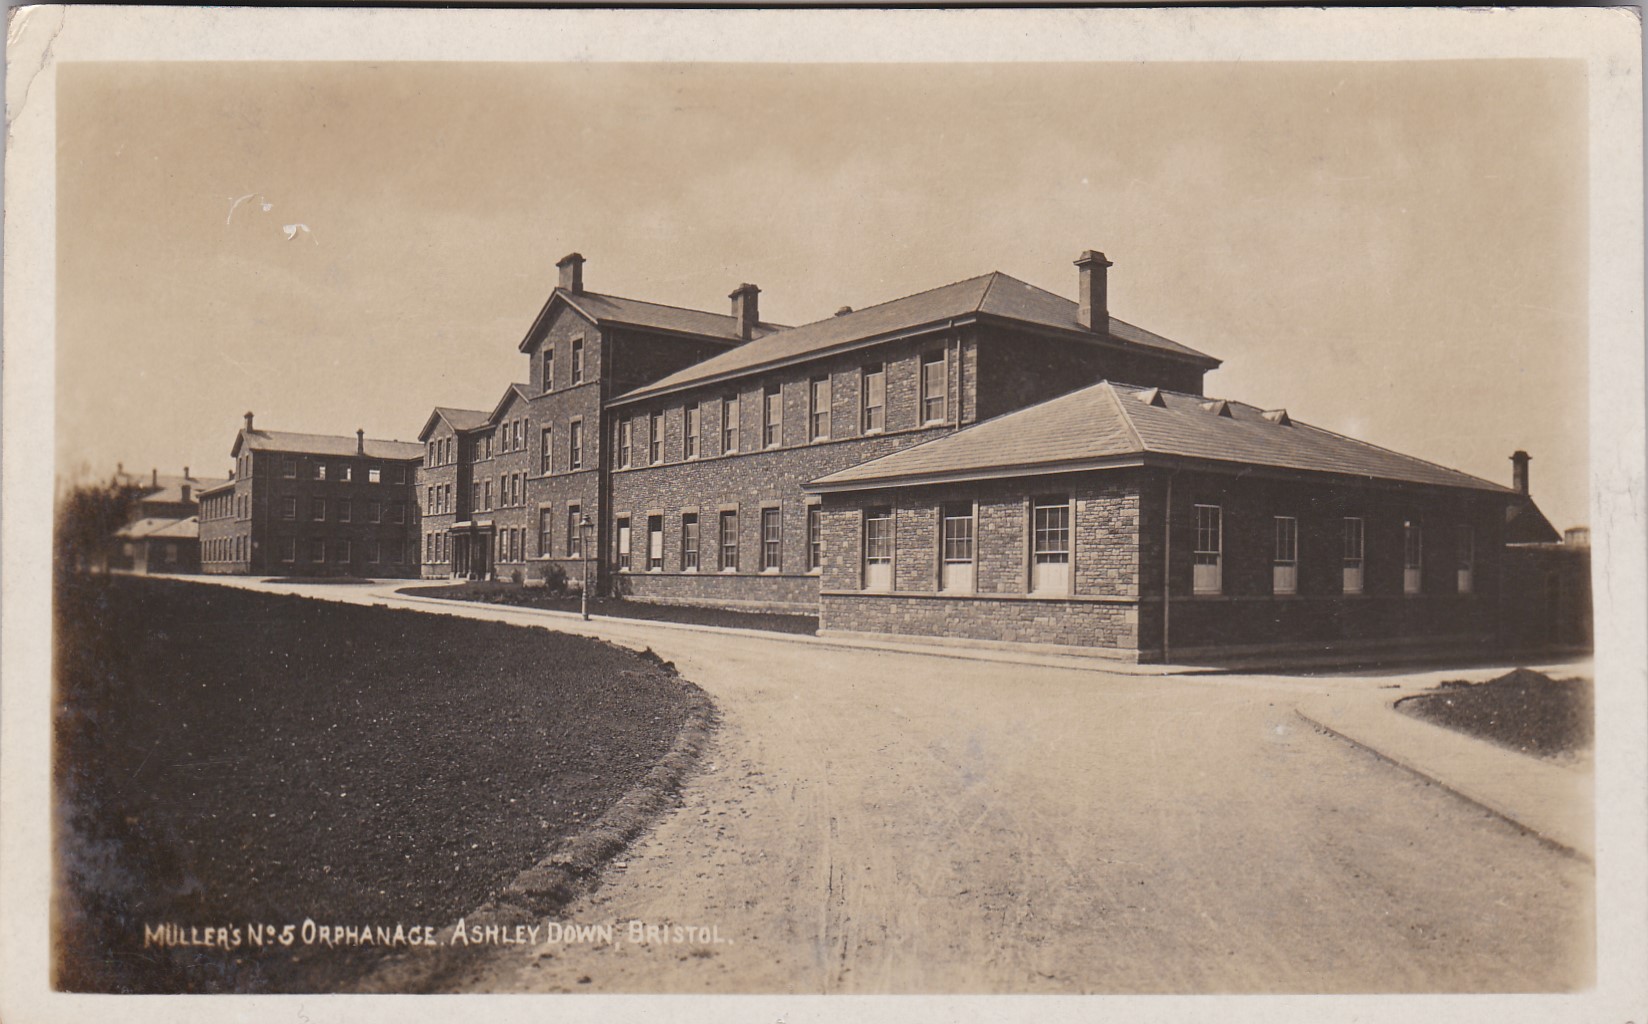 Postcard-Bristol-Millers No5 Orphanage Ashley Down - fine RP full view, used 1918